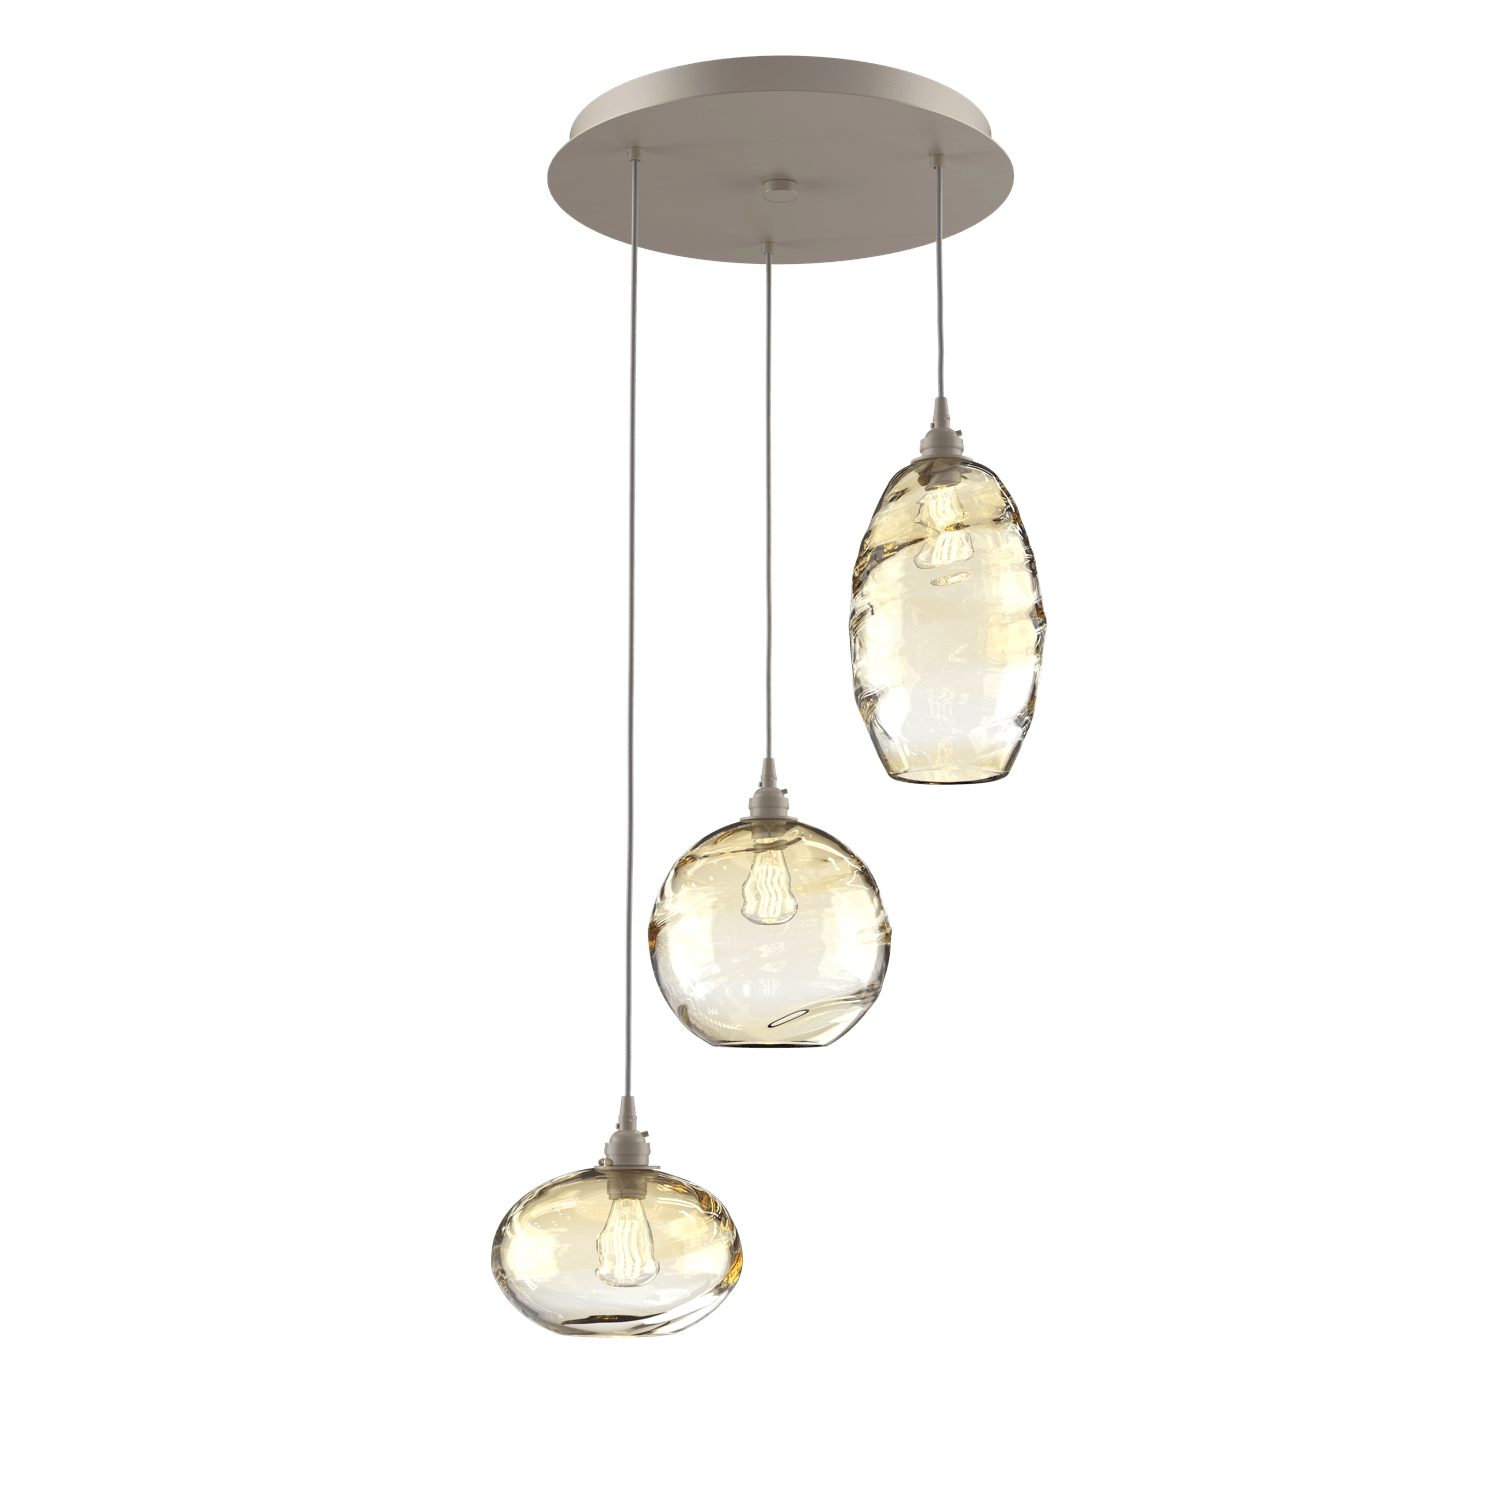 CHB0048-03-BS-OA-Hammerton-Studio-Optic-Blown-Glass-Misto-3-light-round-pendant-chandelier-with-metallic-beige-silver-finish-and-optic-amber-blown-glass-shades-and-incandescent-lamping